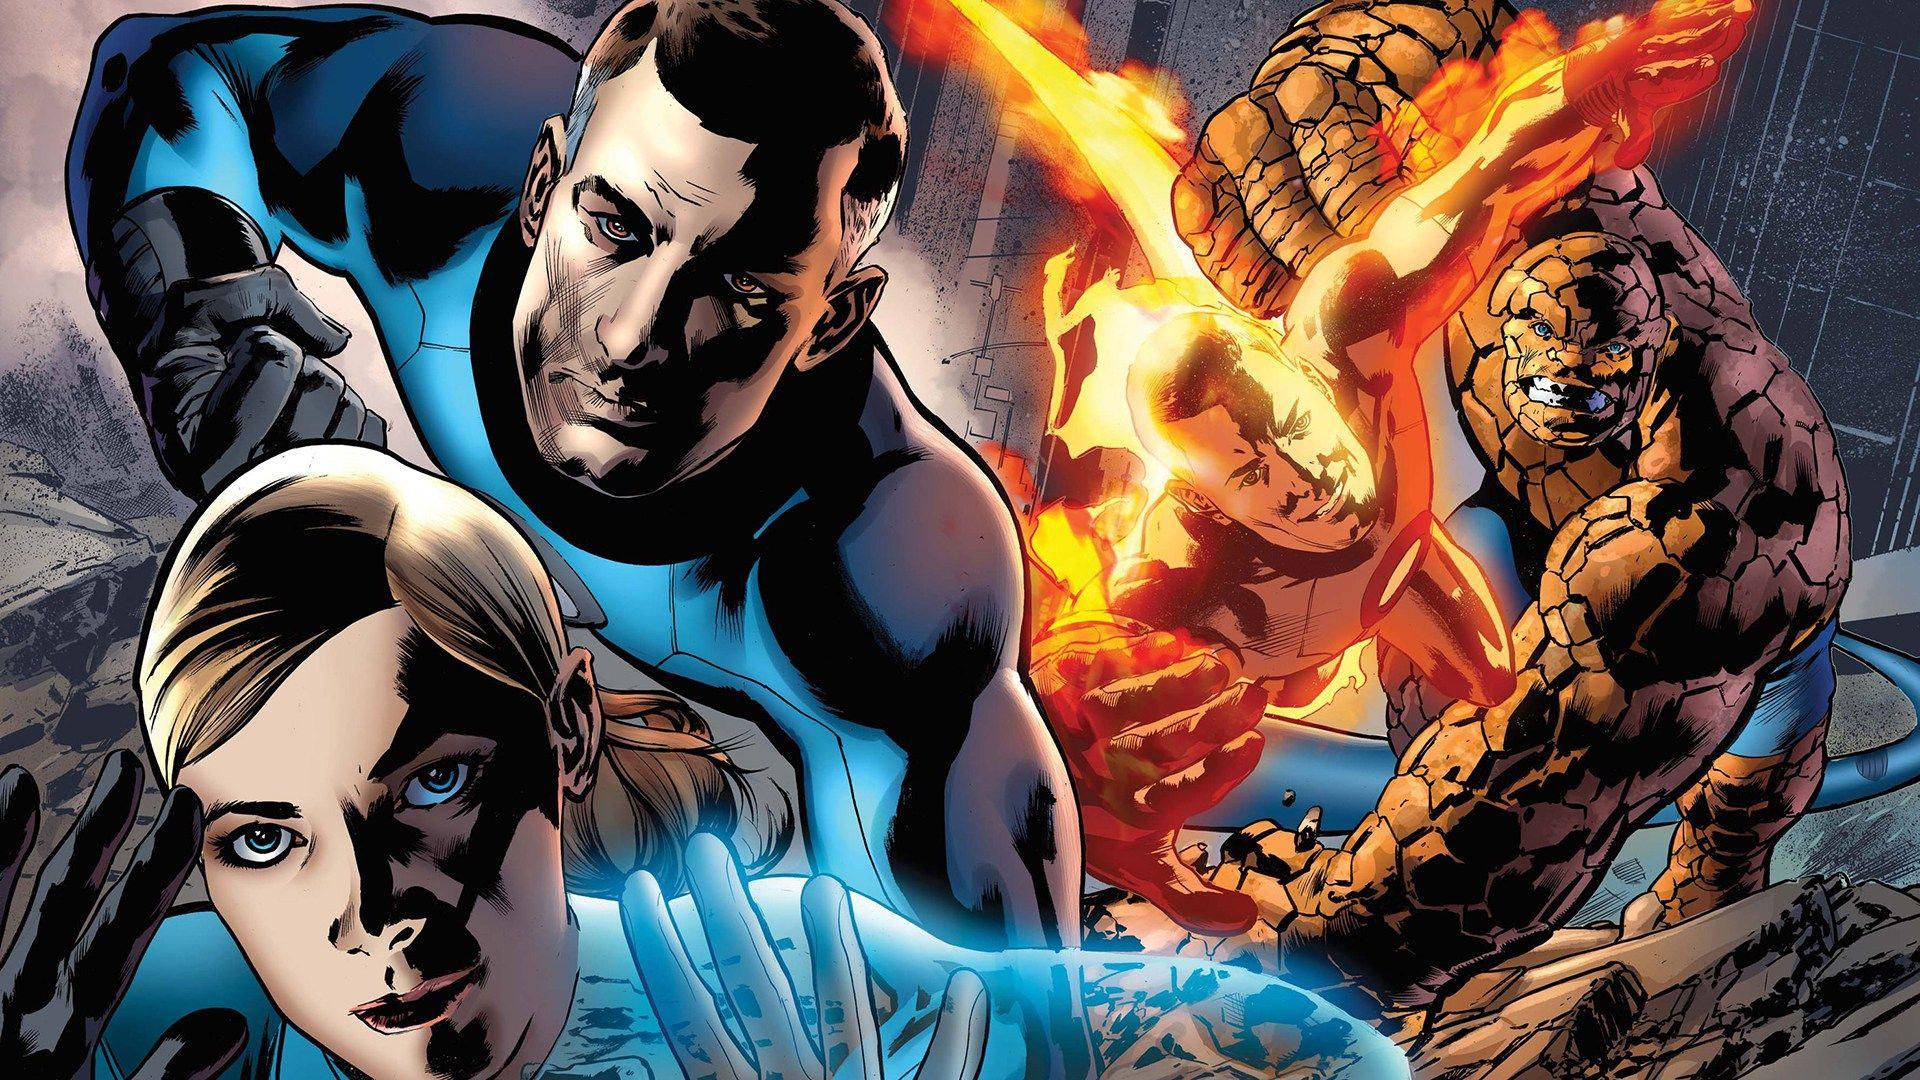 Fantastic Four, Human Torch (Johnny Storm), Invisible Woman (Sue